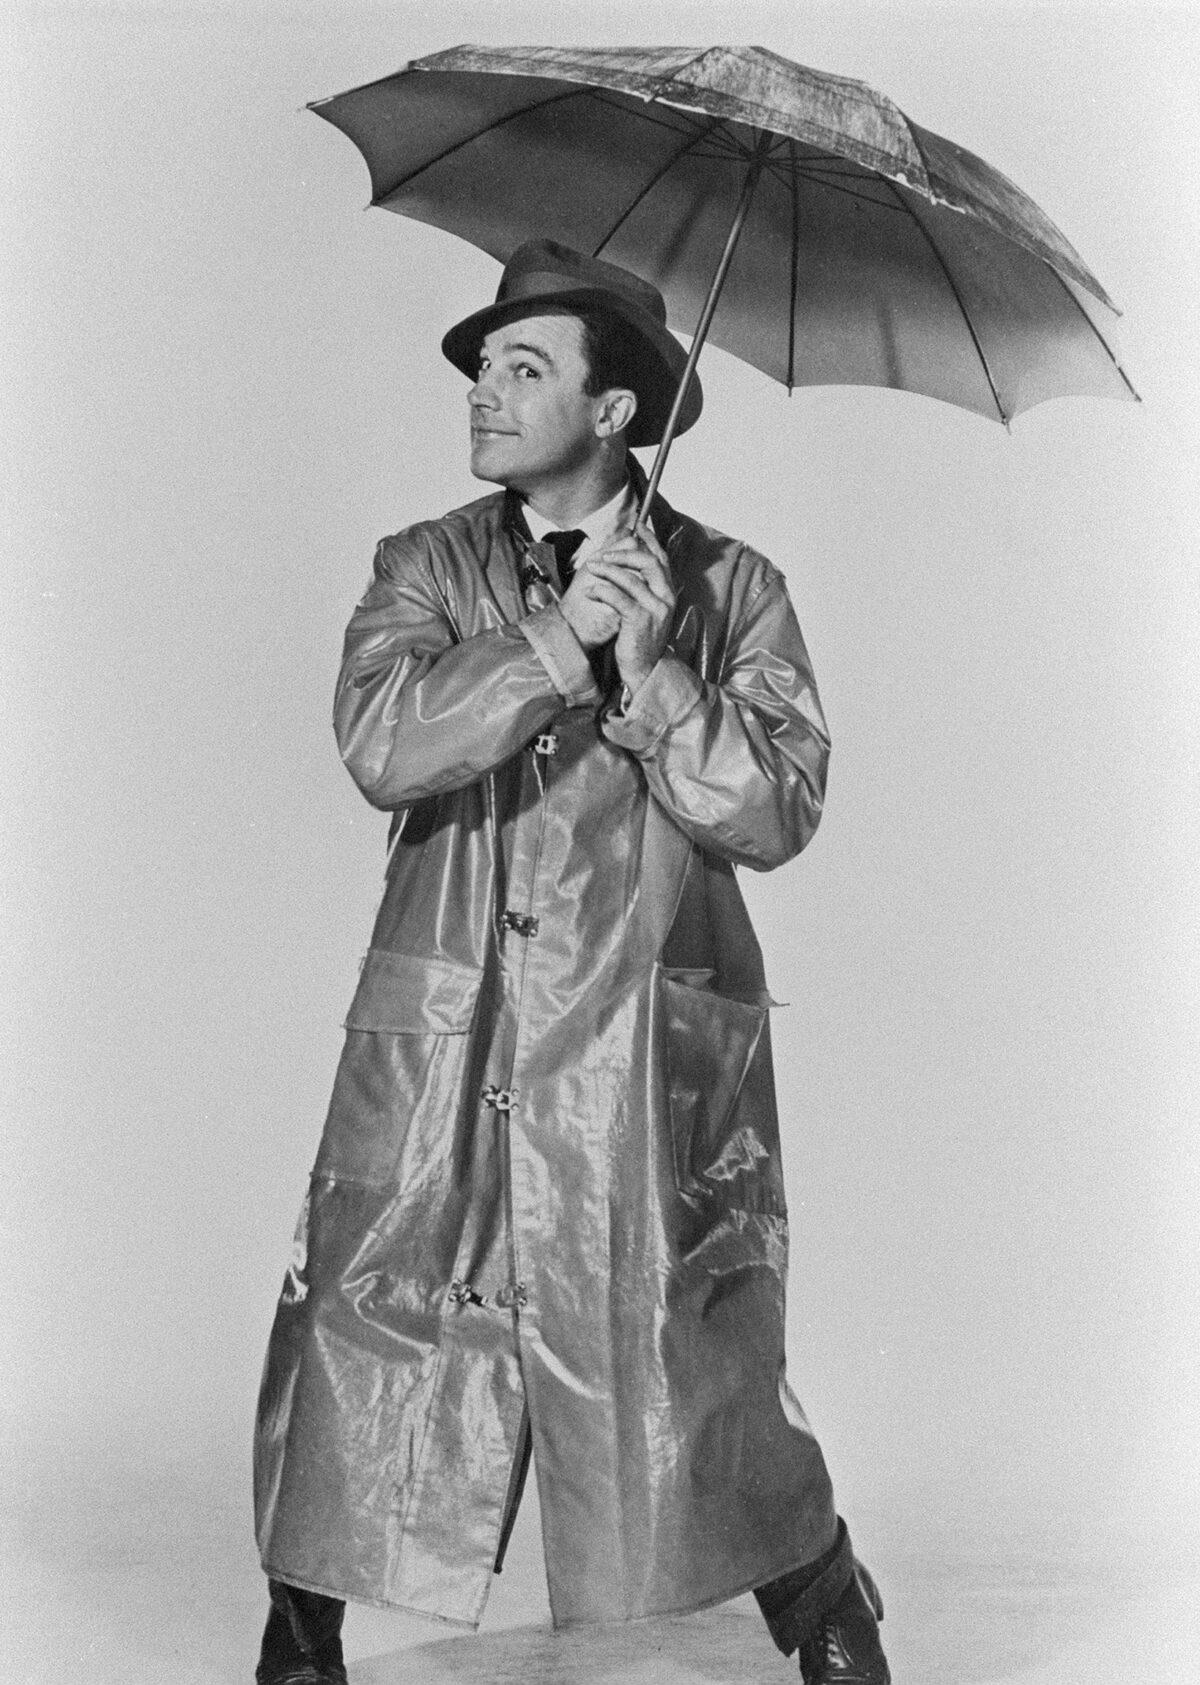 American actor, dancer and director Gene Kelly during the shooting of the movie "Singin'" in the Rain" in 1952. (AFP/AFP via Getty Images)